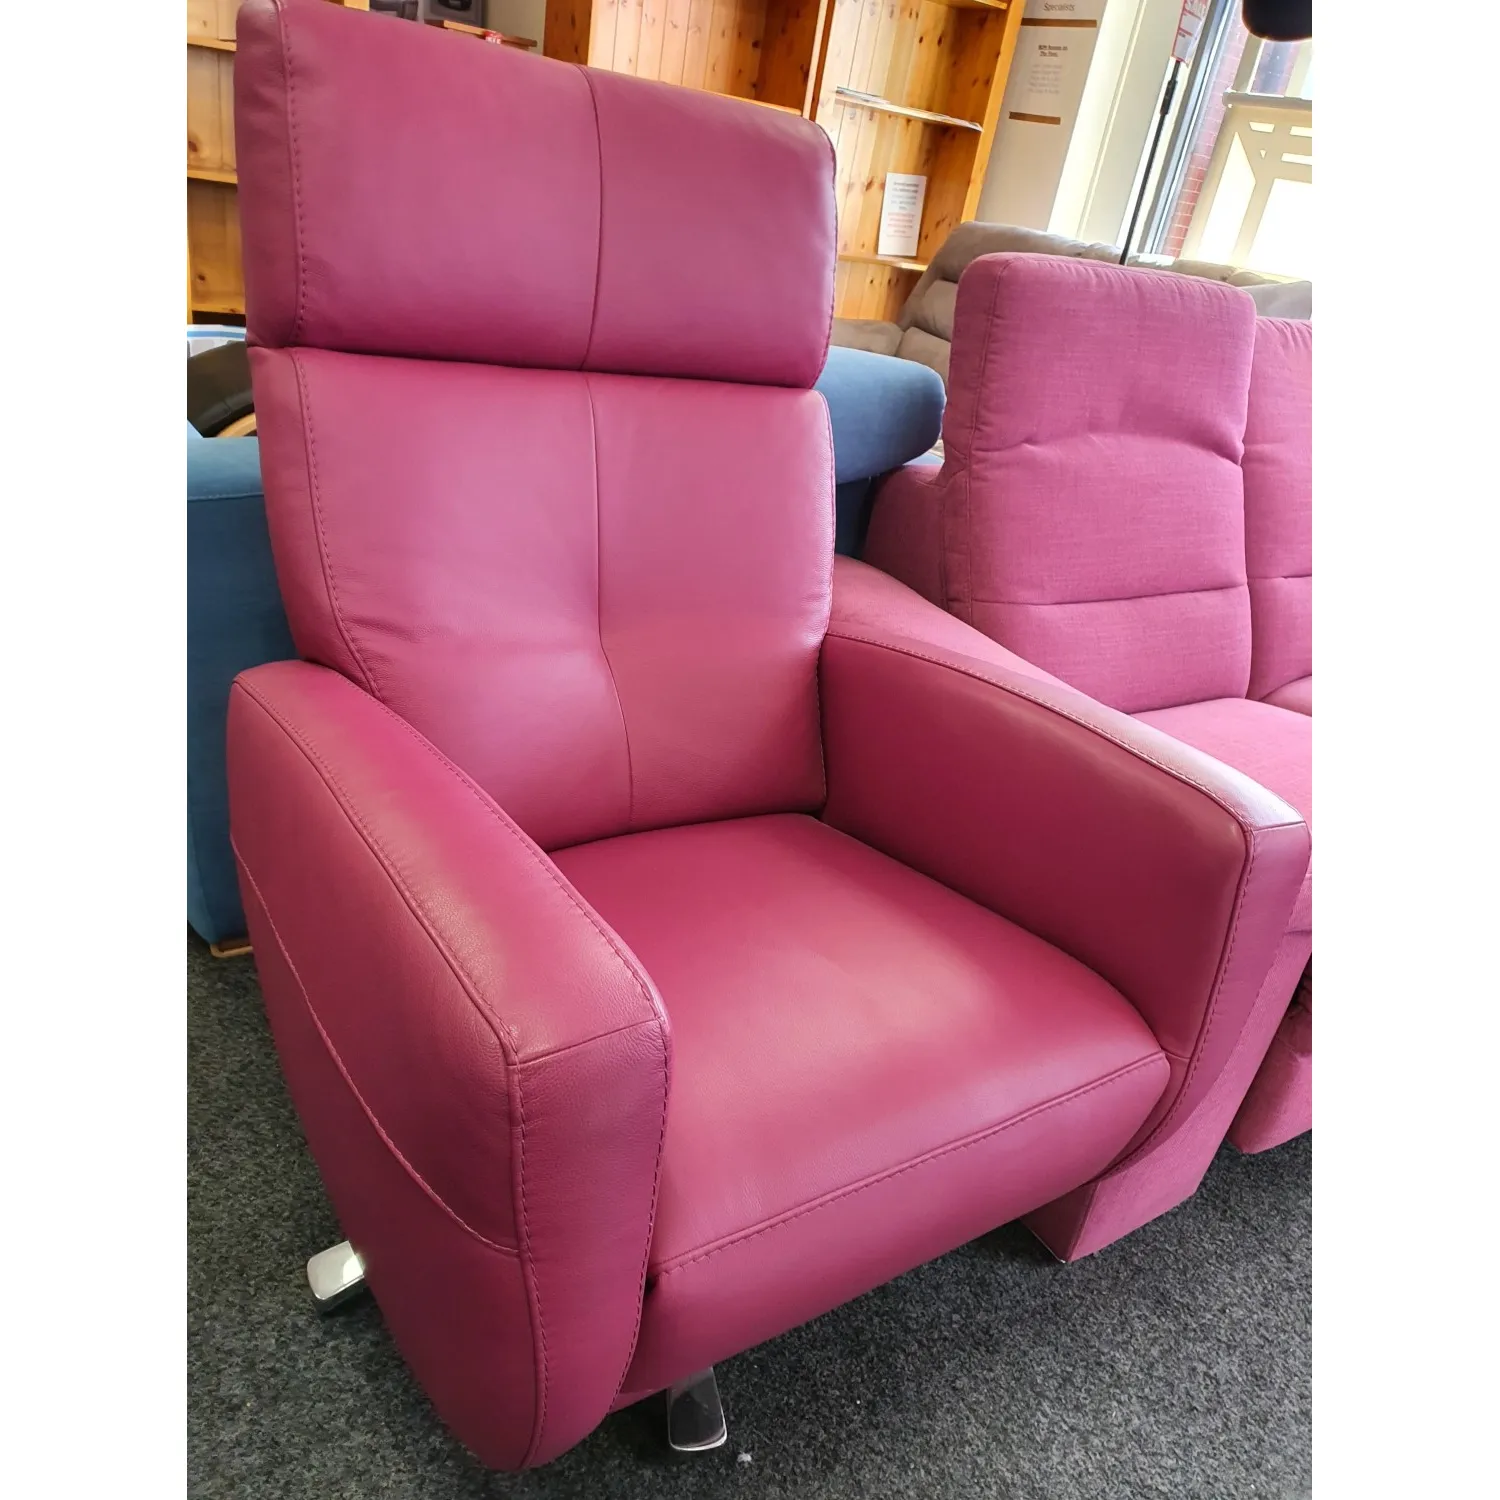 Pink Leather Swivel Recliner Chair